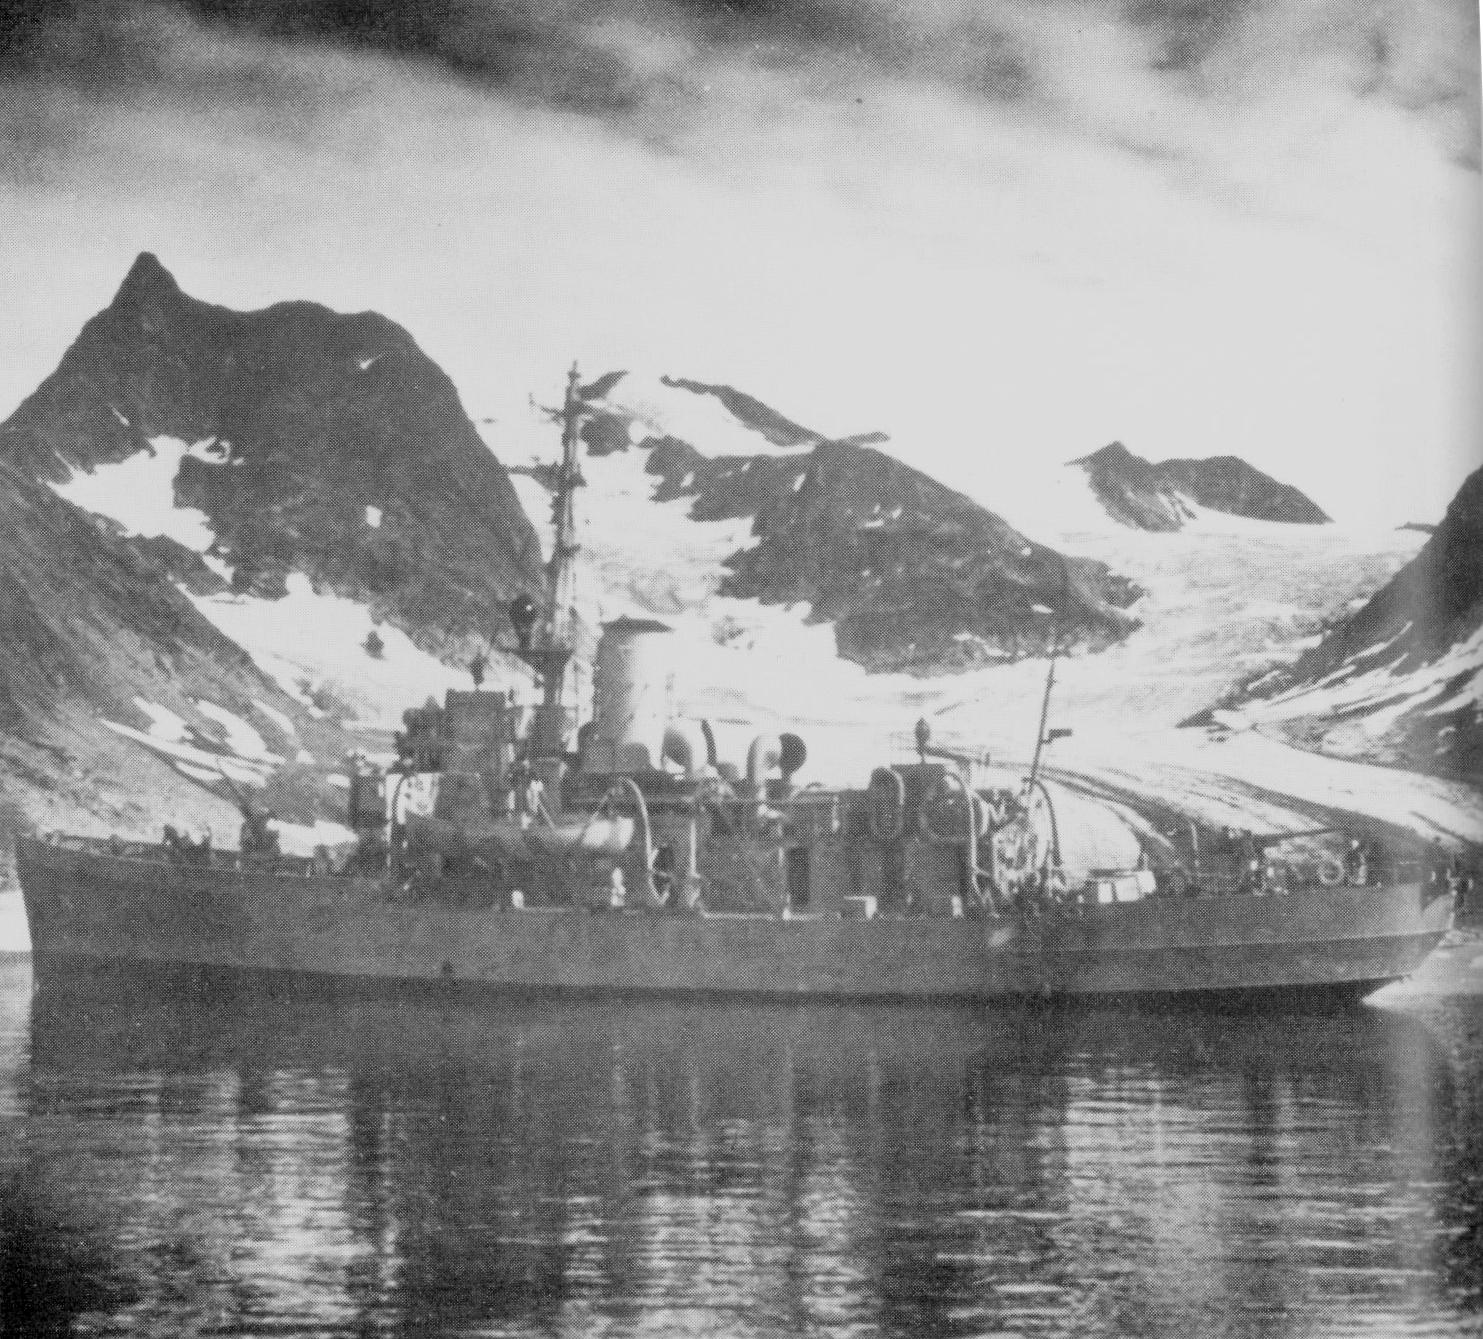 Coast Guard Cutter Comanche in wartime paint scheme with the high peaks of Greenland in the background. (U.S. Coast Guard)